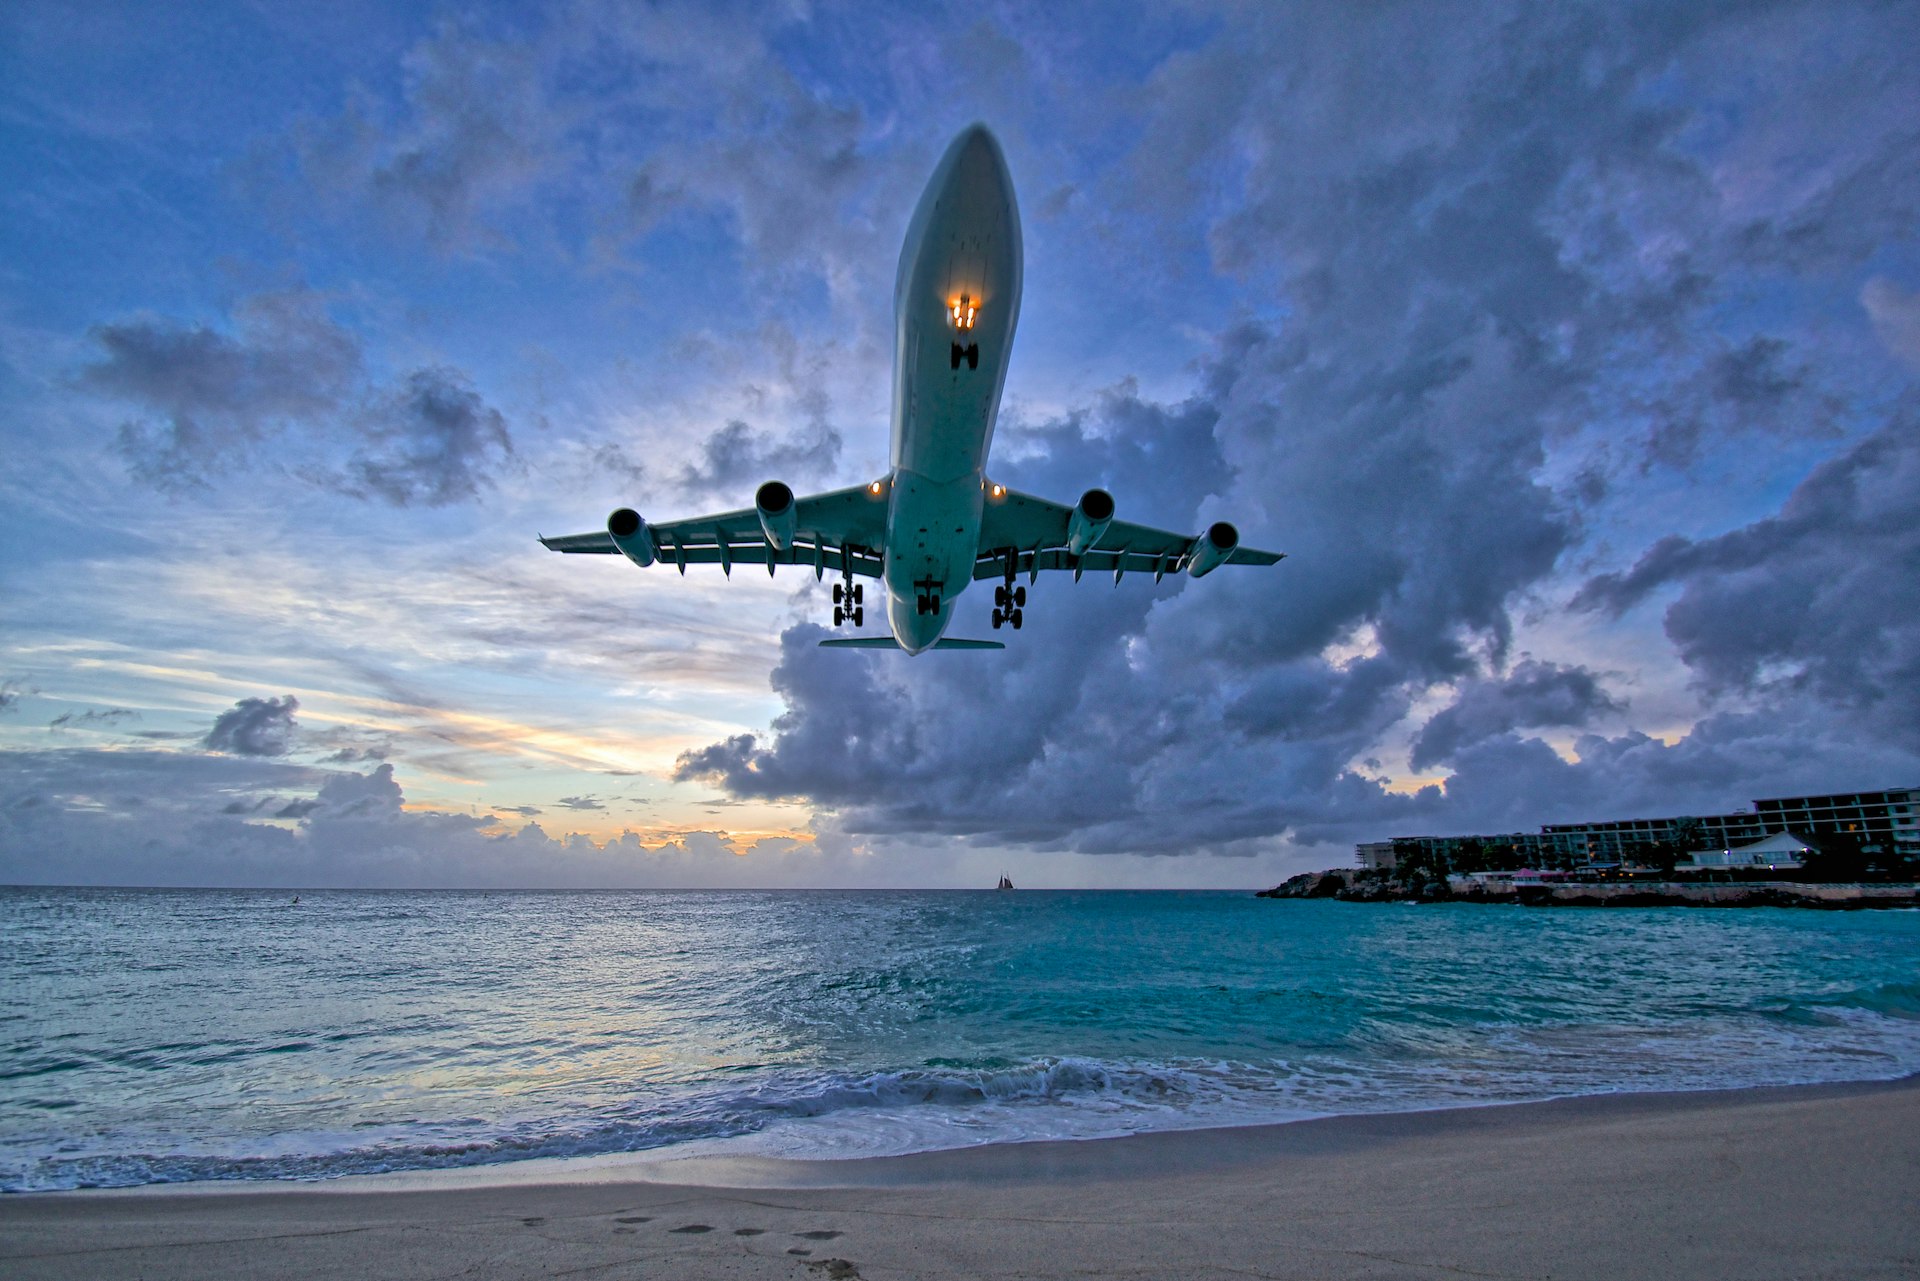 A plane comes in to land very low over a beach